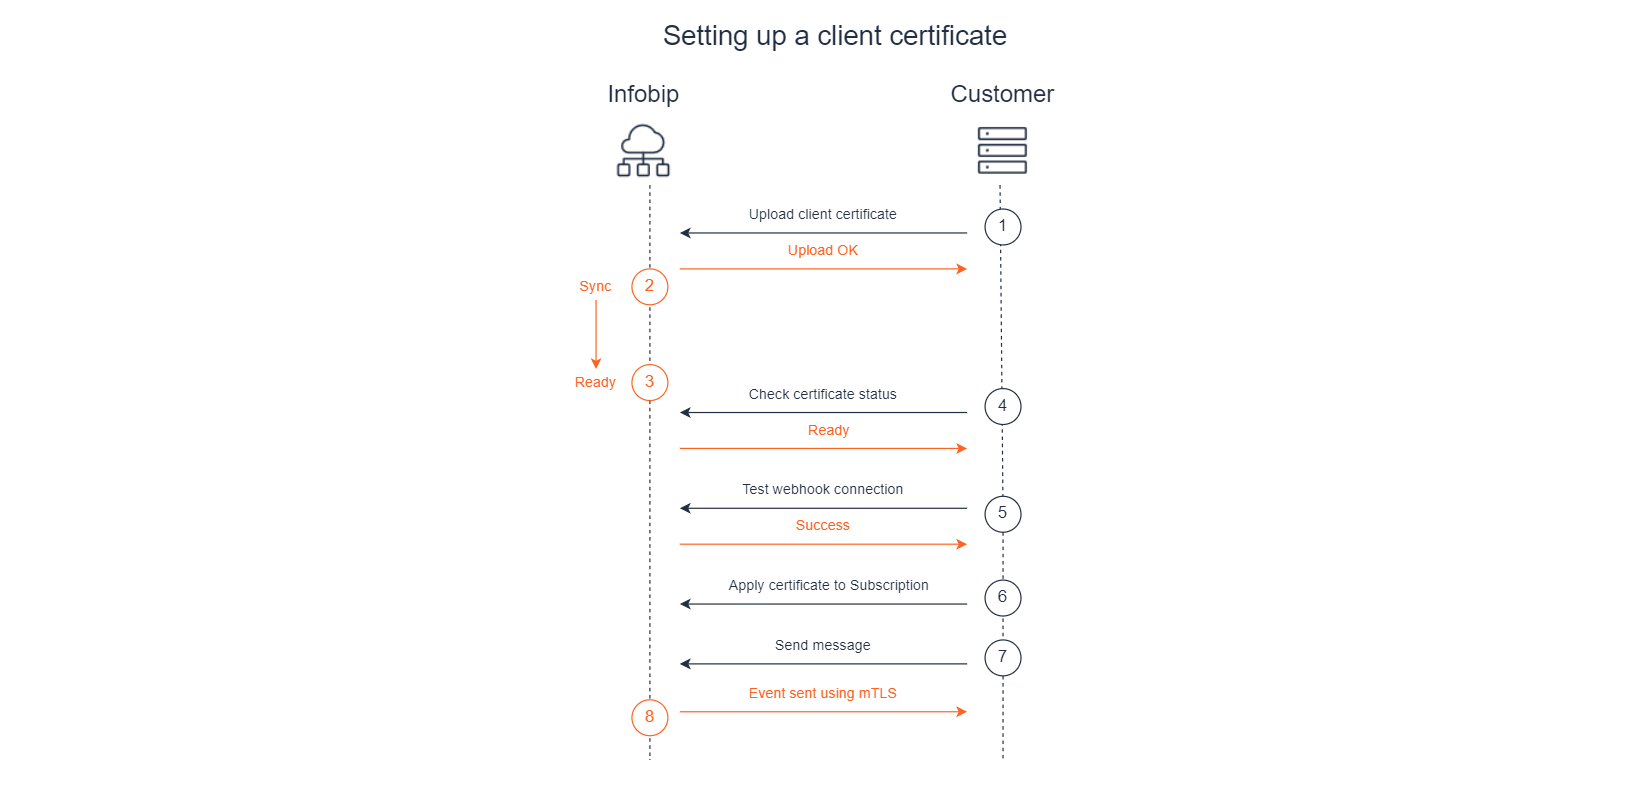 Setting up a client certificate